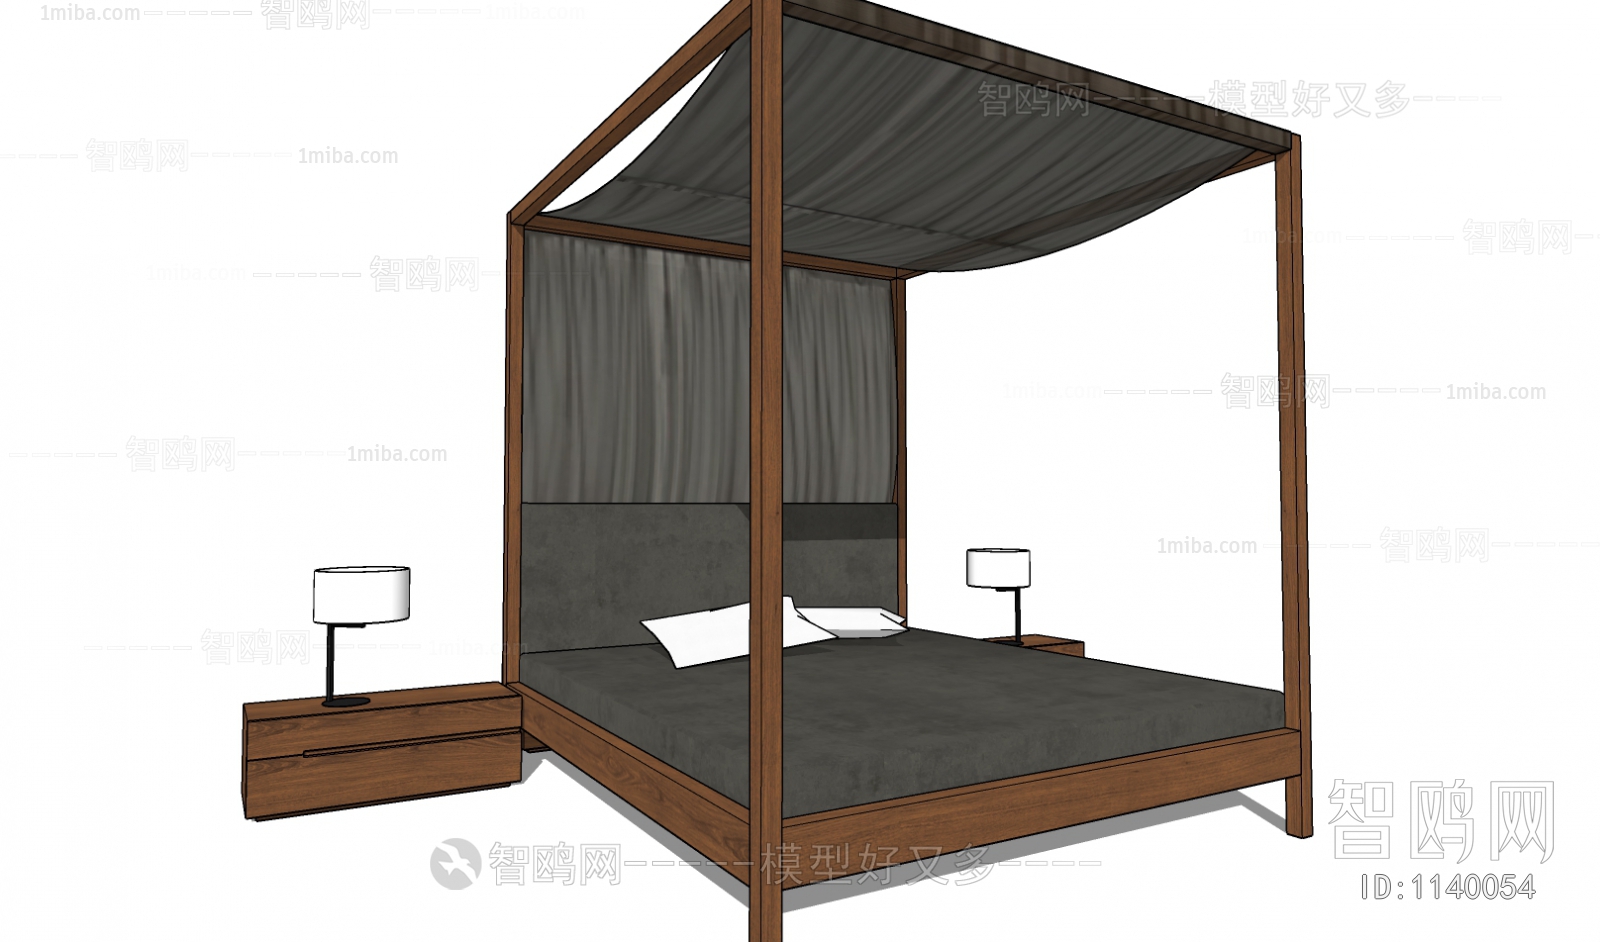 Chinese Style Double Bed